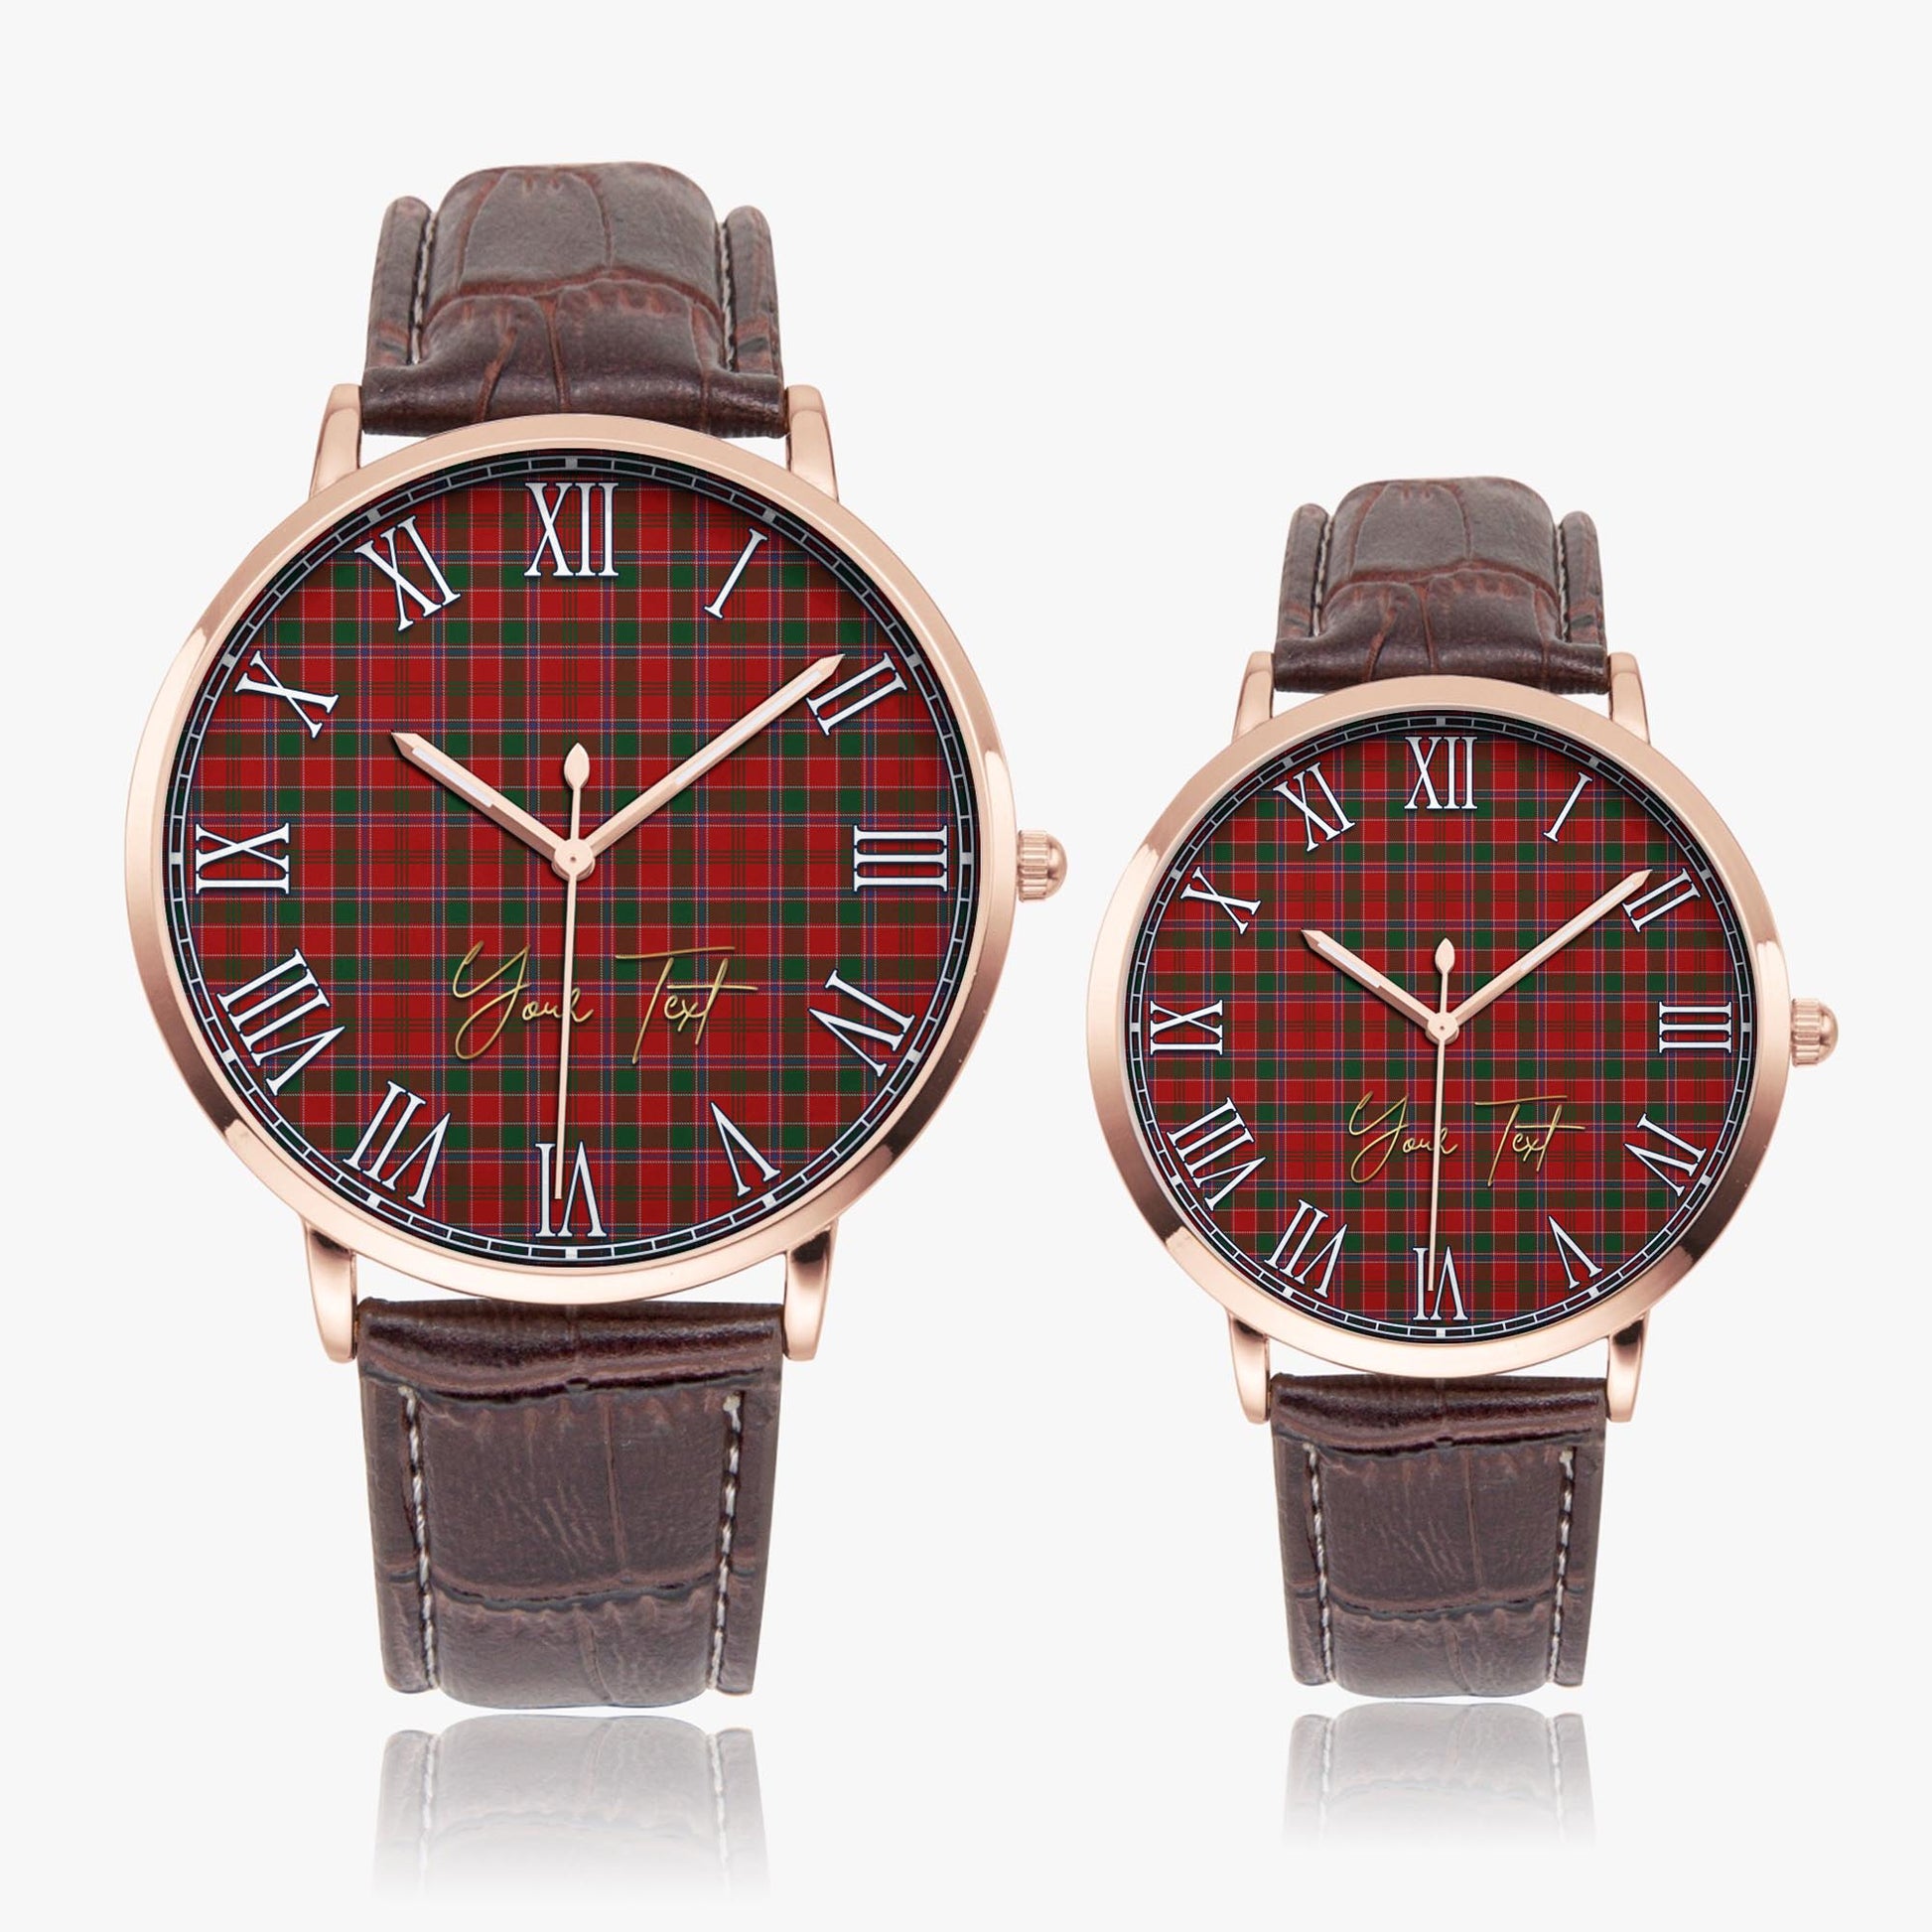 Dalzell (Dalziel) Tartan Personalized Your Text Leather Trap Quartz Watch Ultra Thin Rose Gold Case With Brown Leather Strap - Tartanvibesclothing